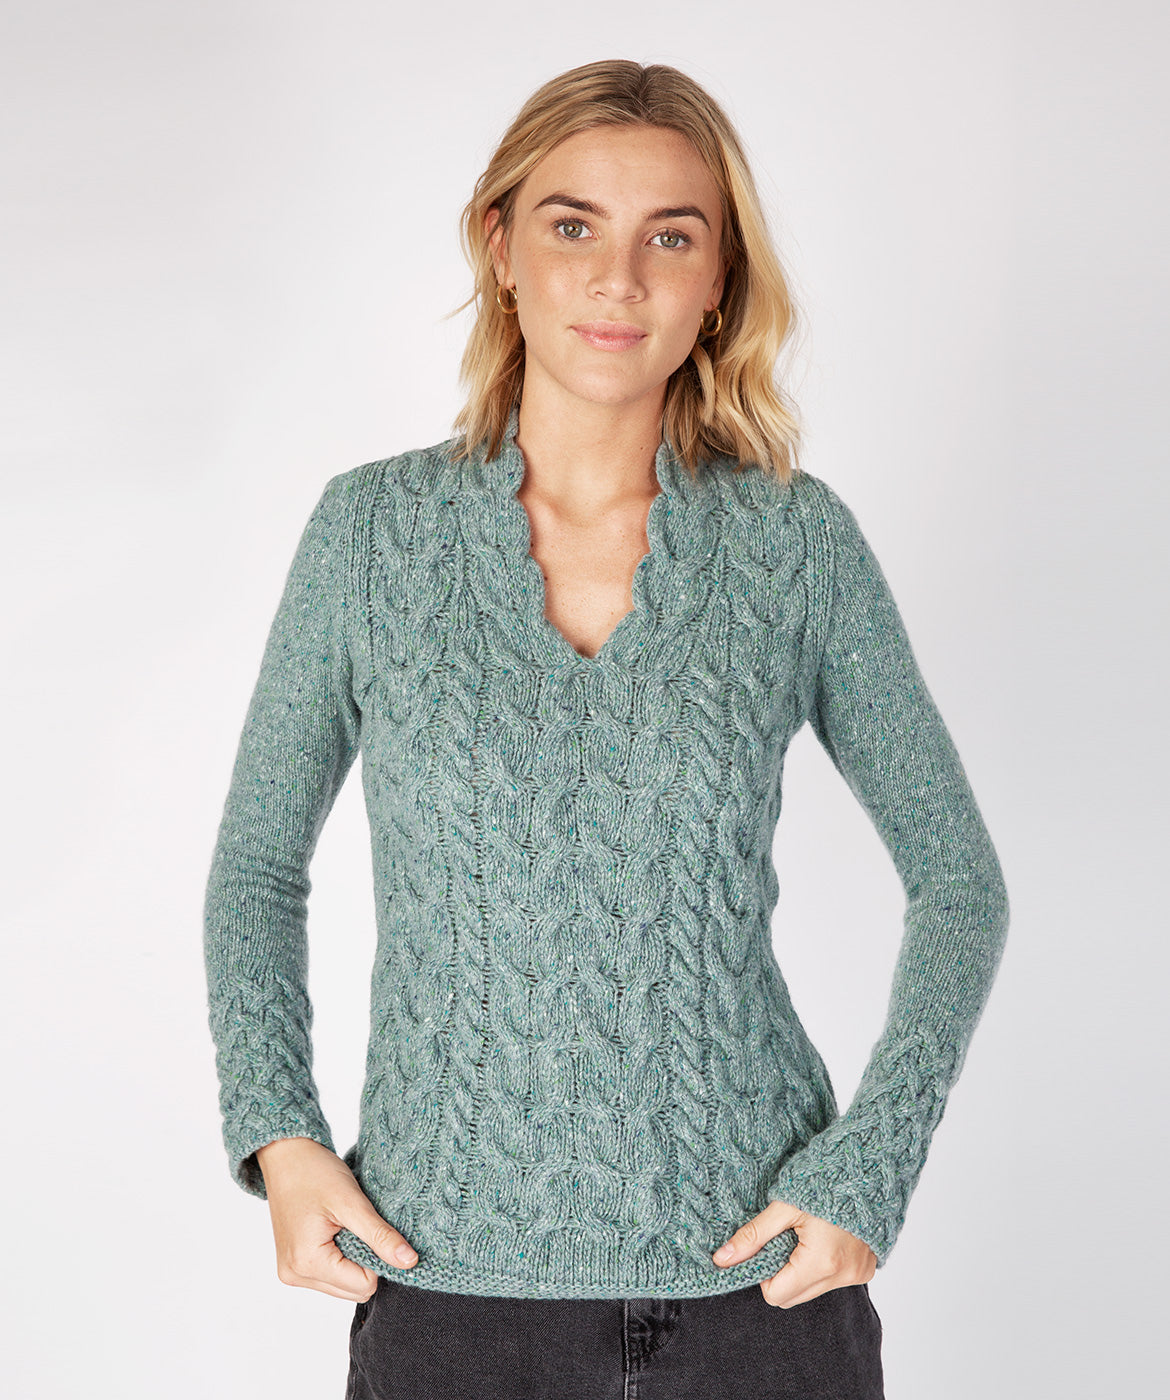 Women's Wool & Cashmere Horseshoe Cable V-Neck Sweater